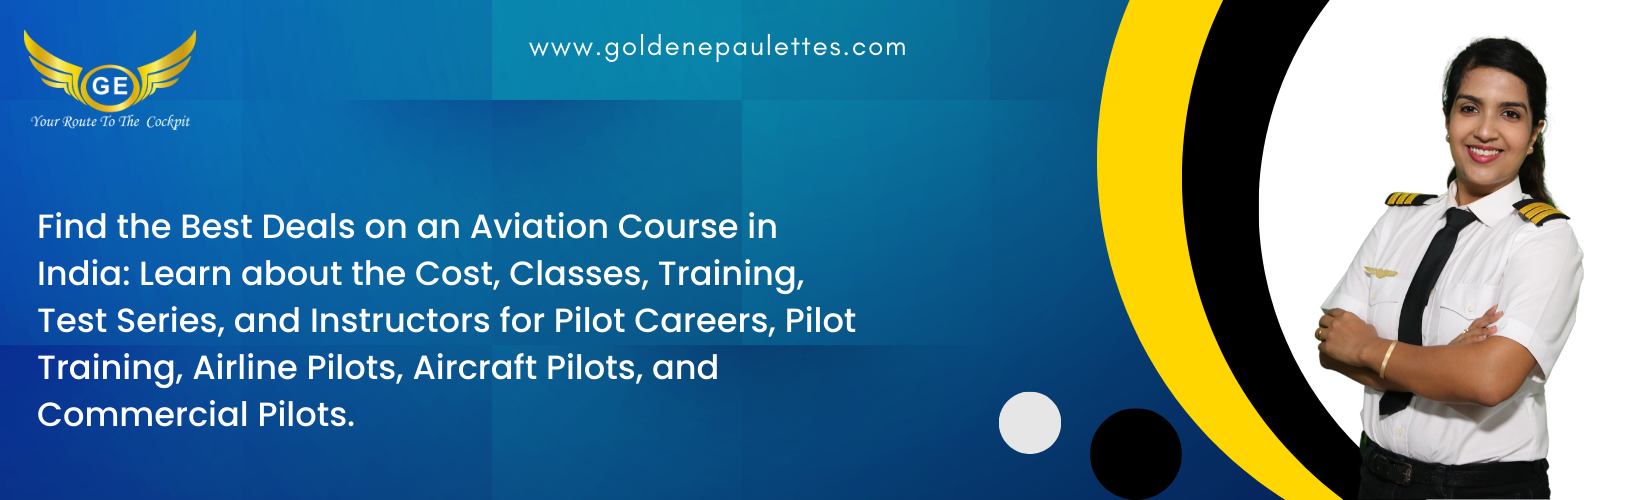 The Cost of an Aviation Course in India